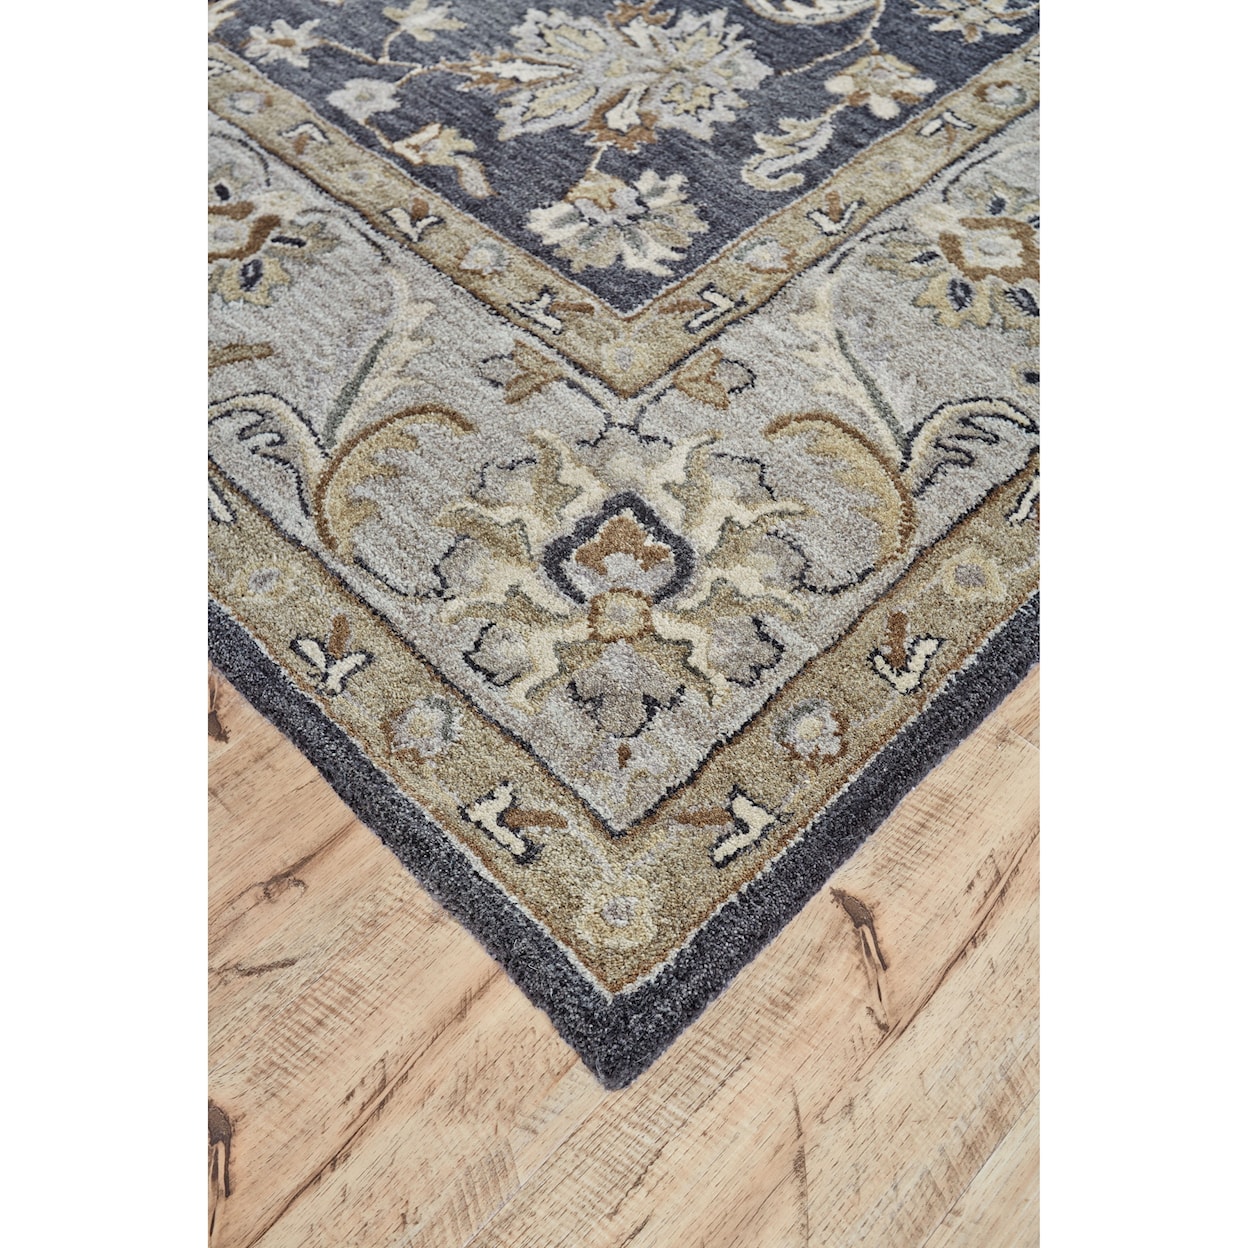 Feizy Rugs Eaton Charcoal 2'-6" X 10' Runner Rug